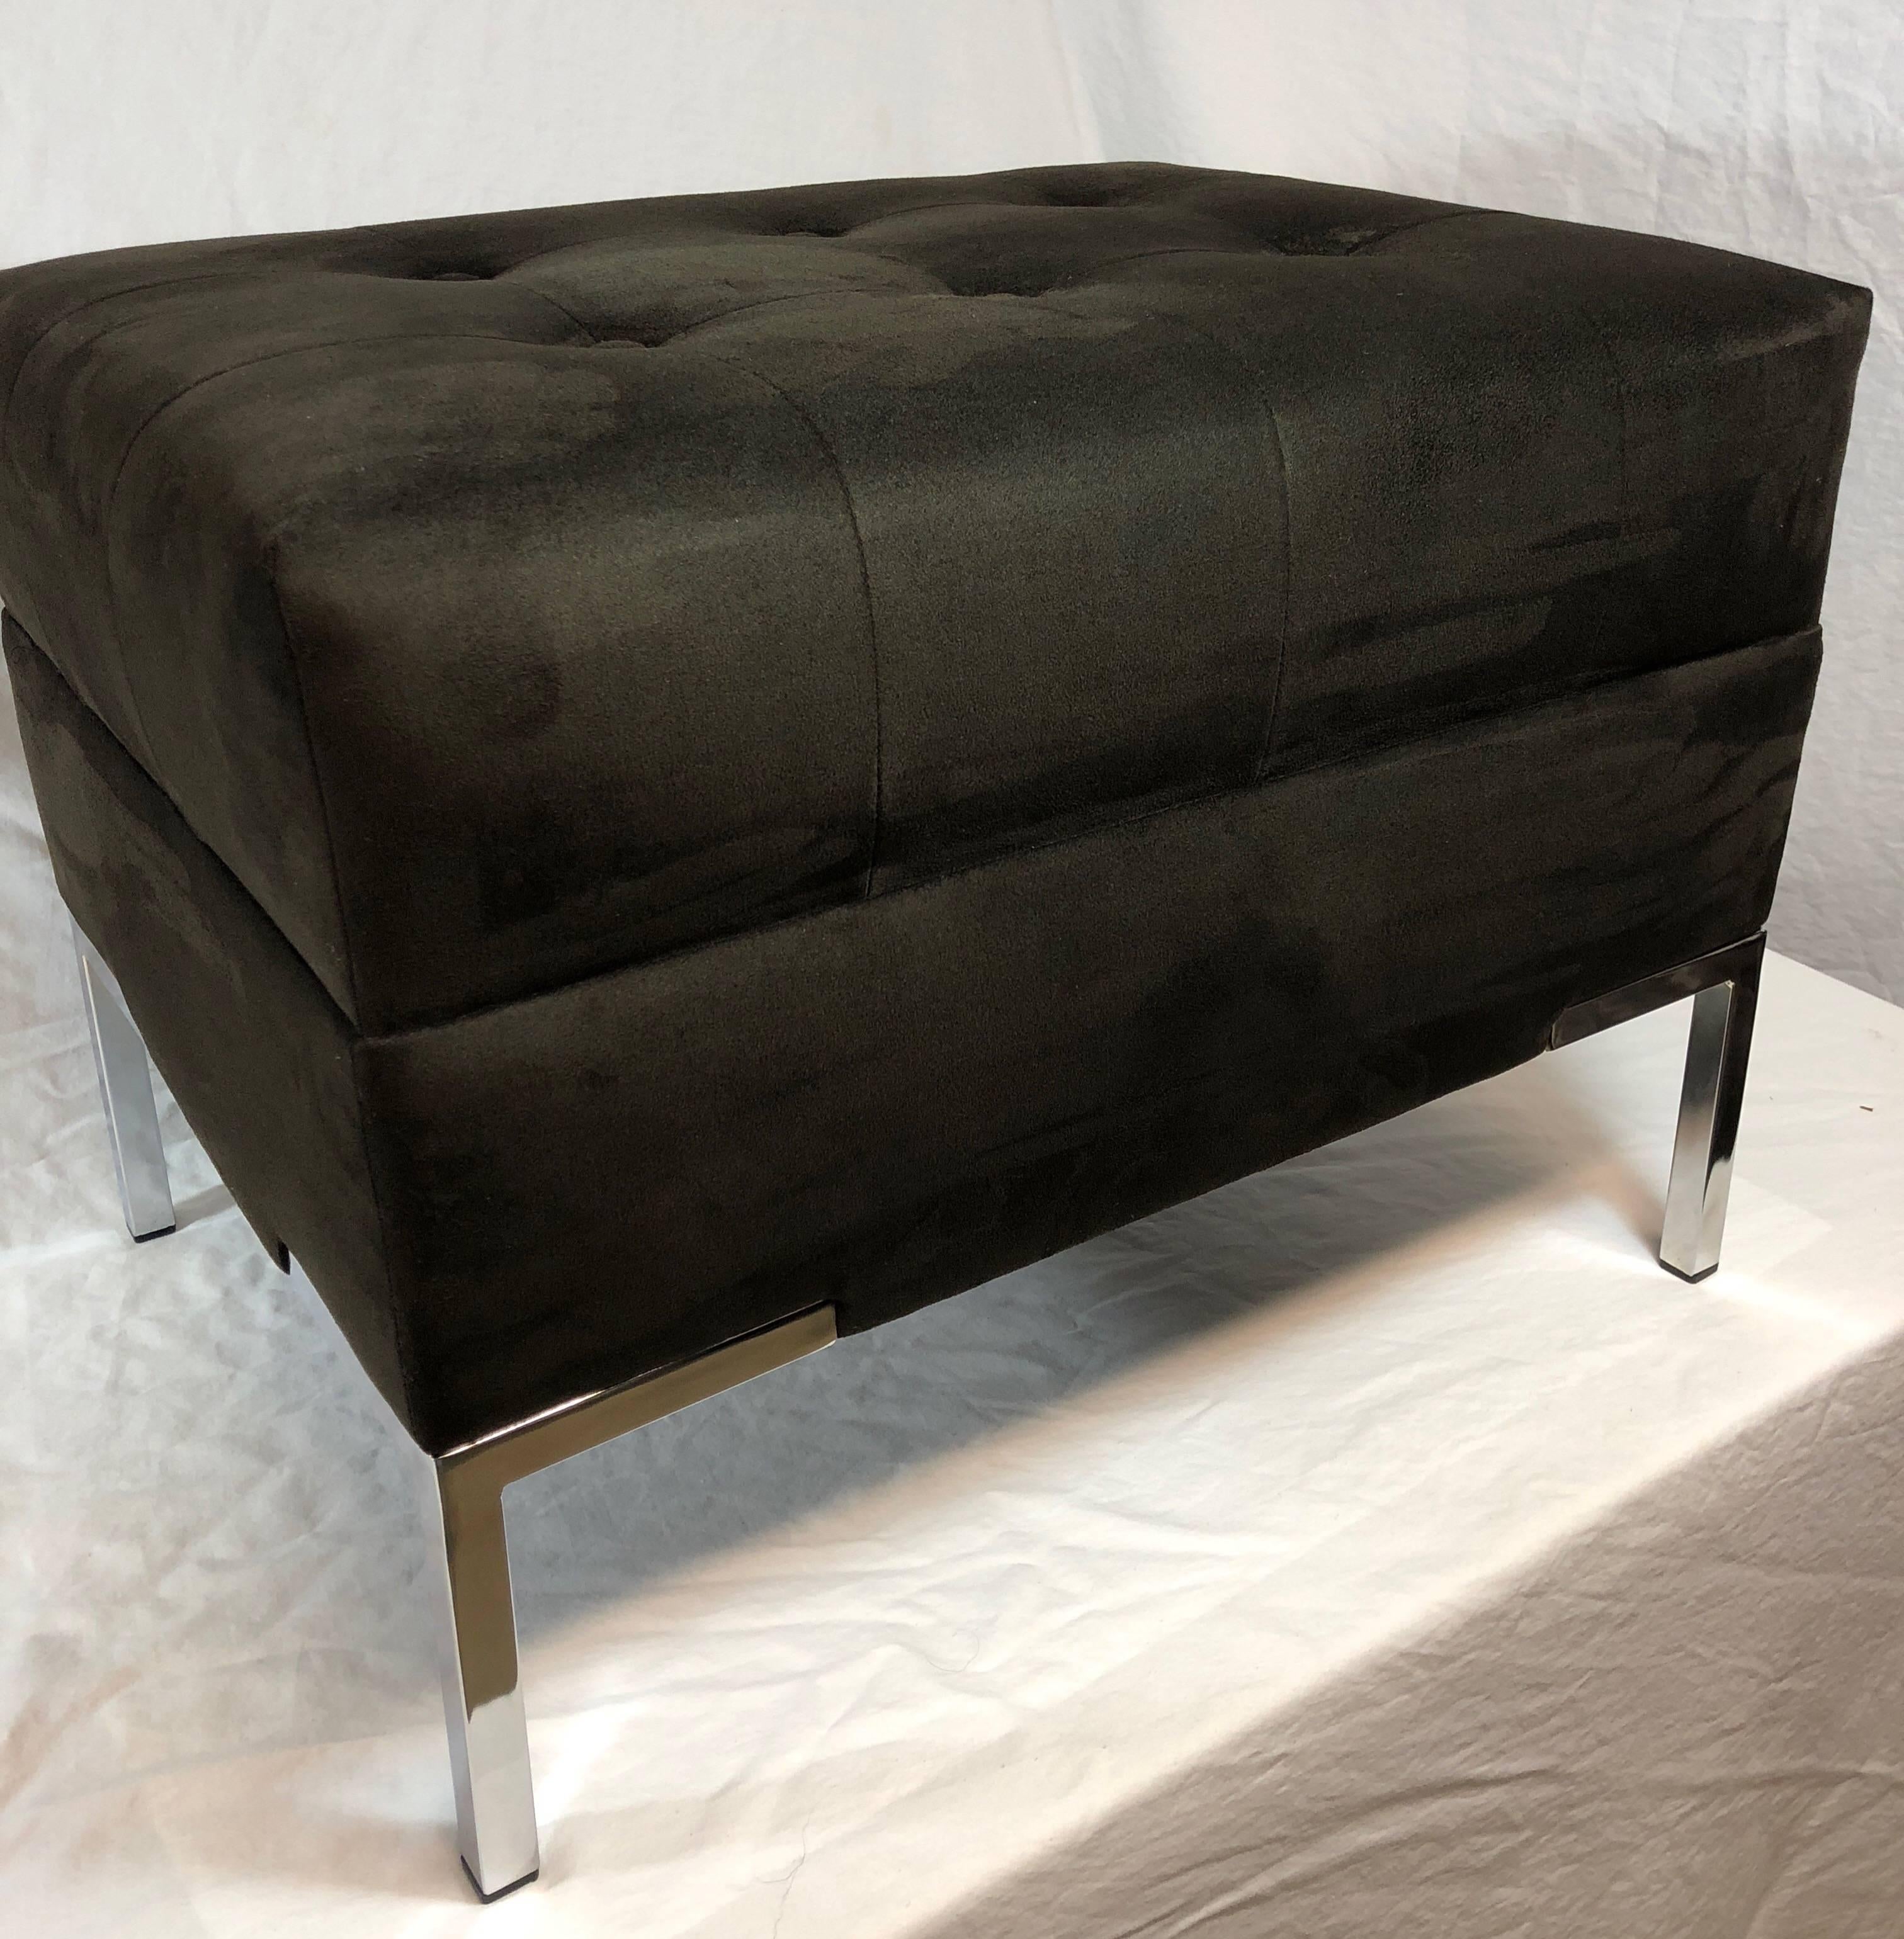 Custom upholstered integrated leg velvet bench. Shown is rich chocolate brown velvet, with buttons and seaming. Available in any size custom made to order COM / COL. Legs can be brass, nickel, chrome or any powder coat color. Can be bought in pairs